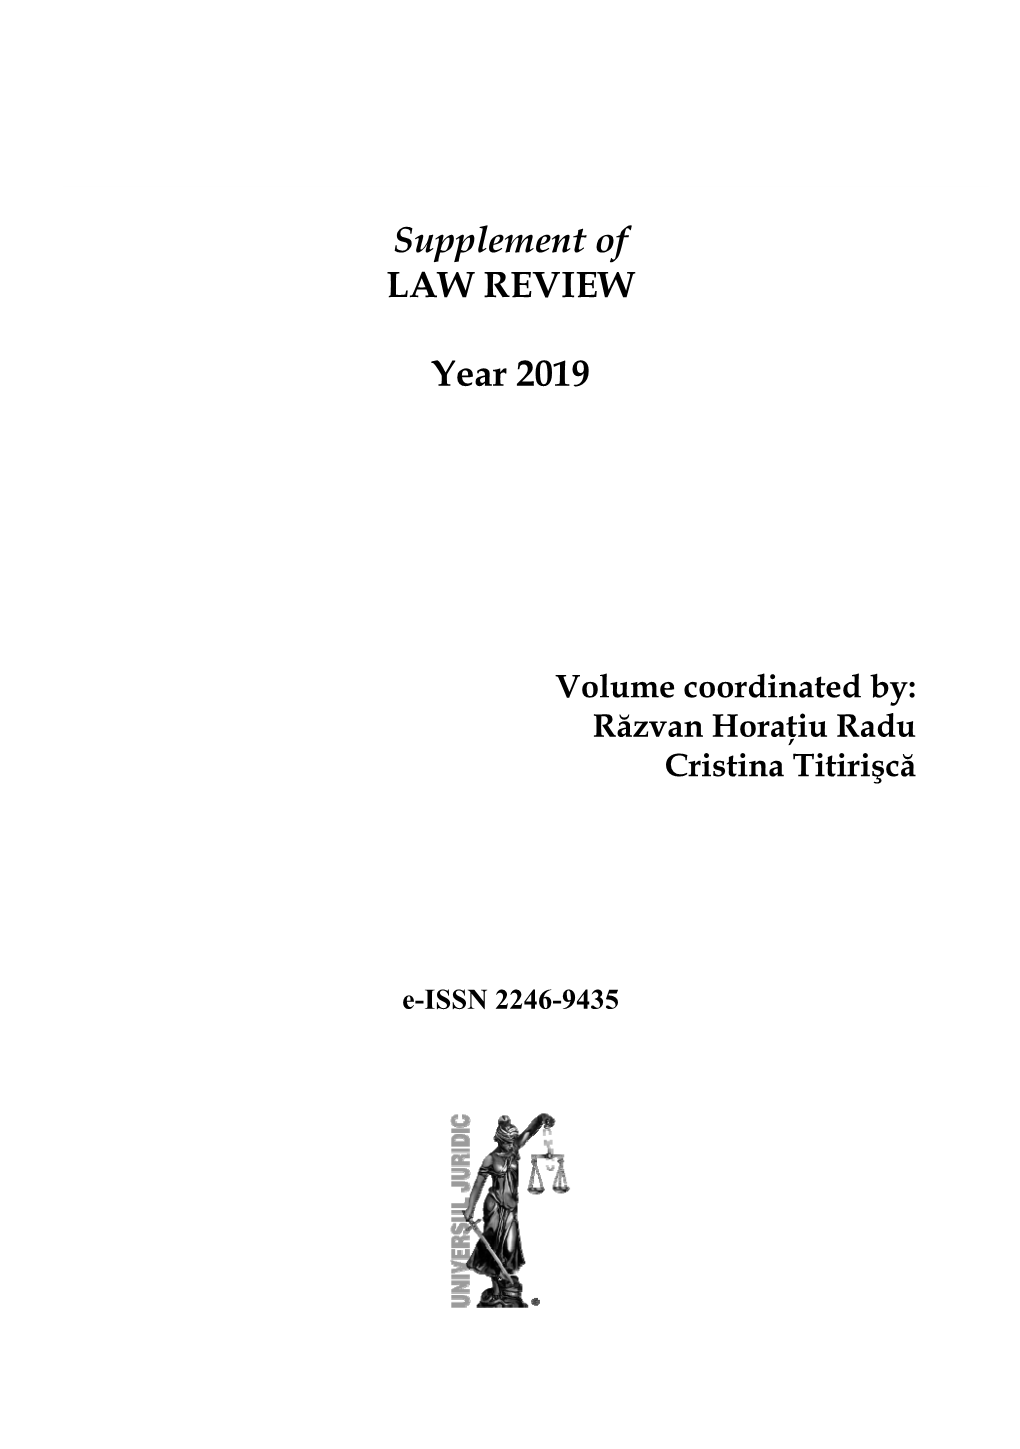 Supplement of LAW REVIEW Year 2019